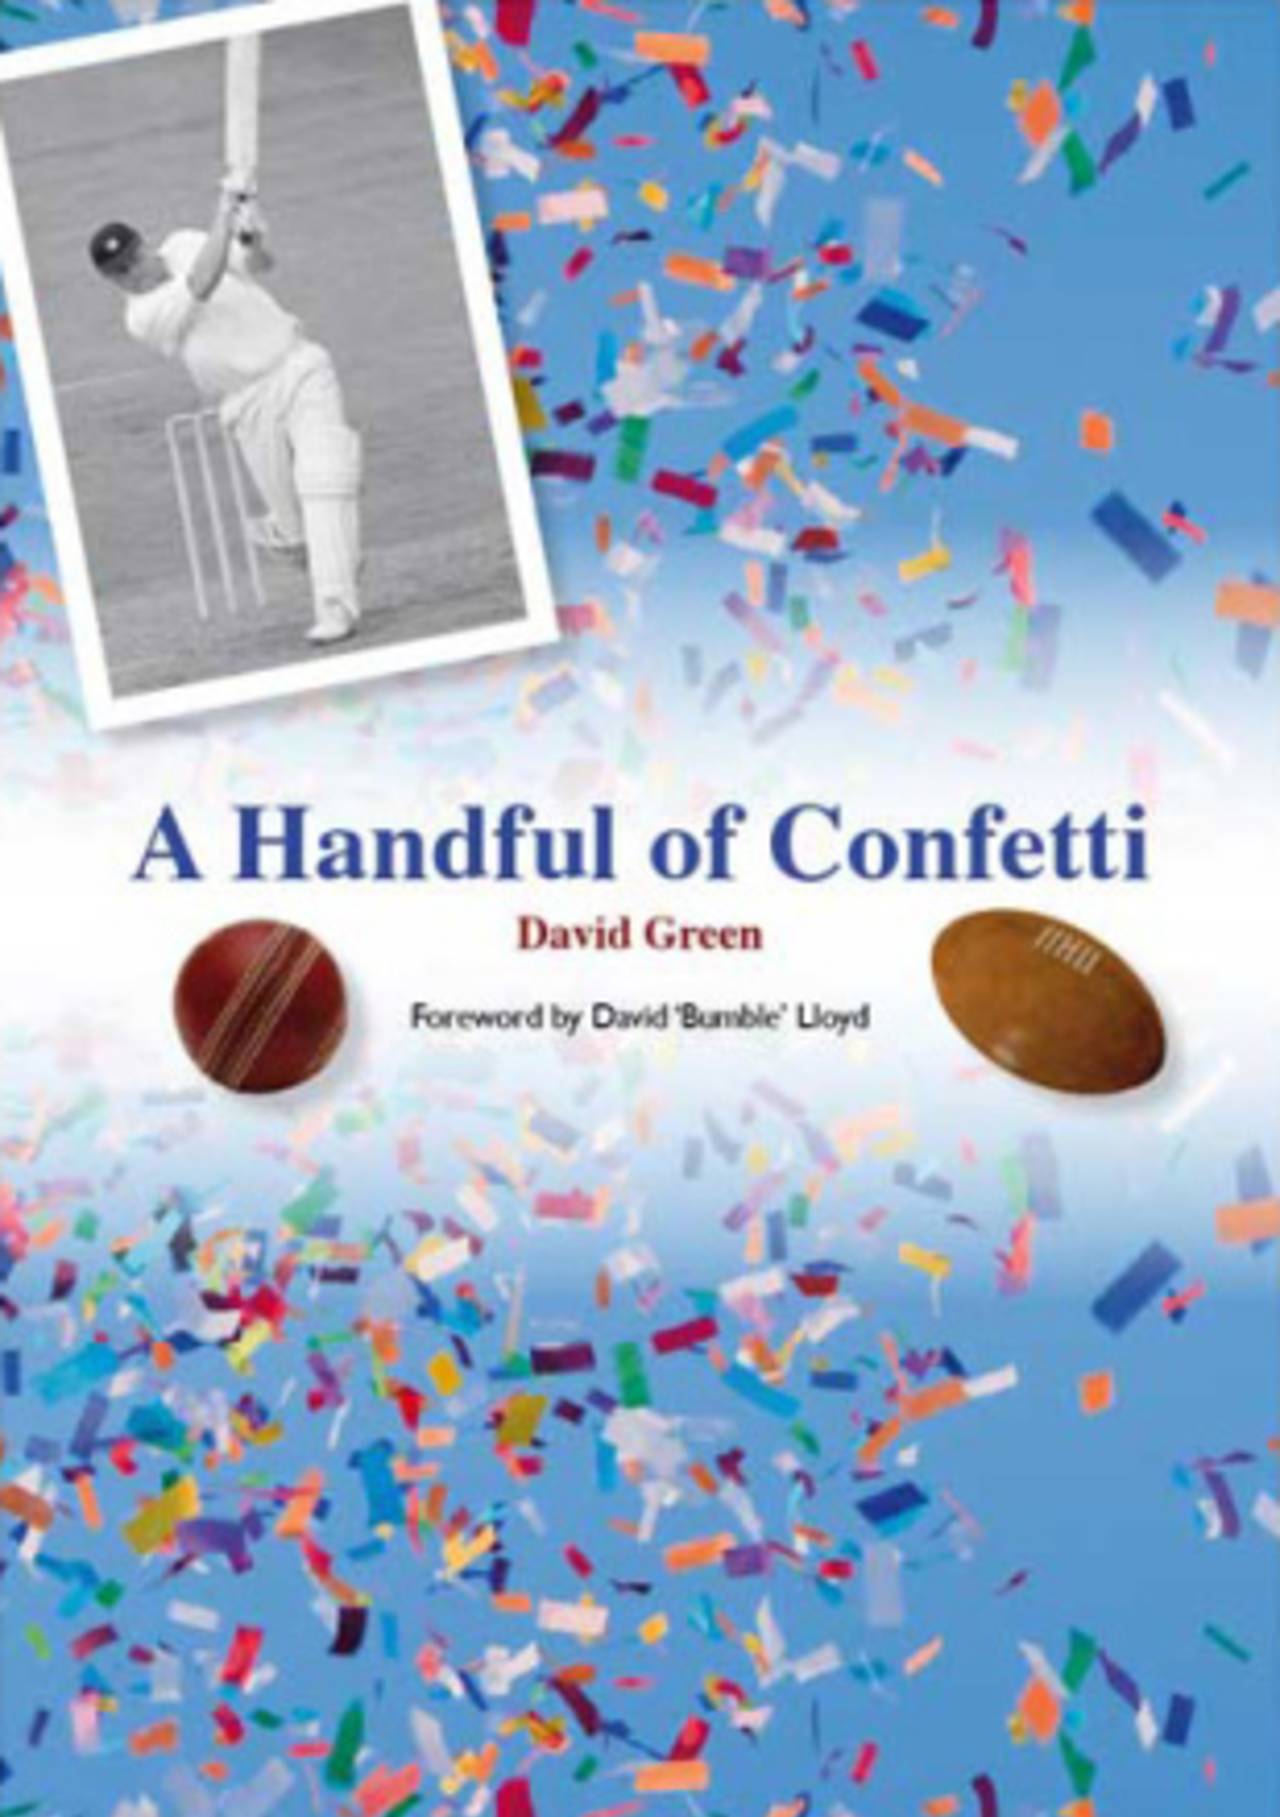 Cover image of David Green's <i>A Handful of Confetti</I>